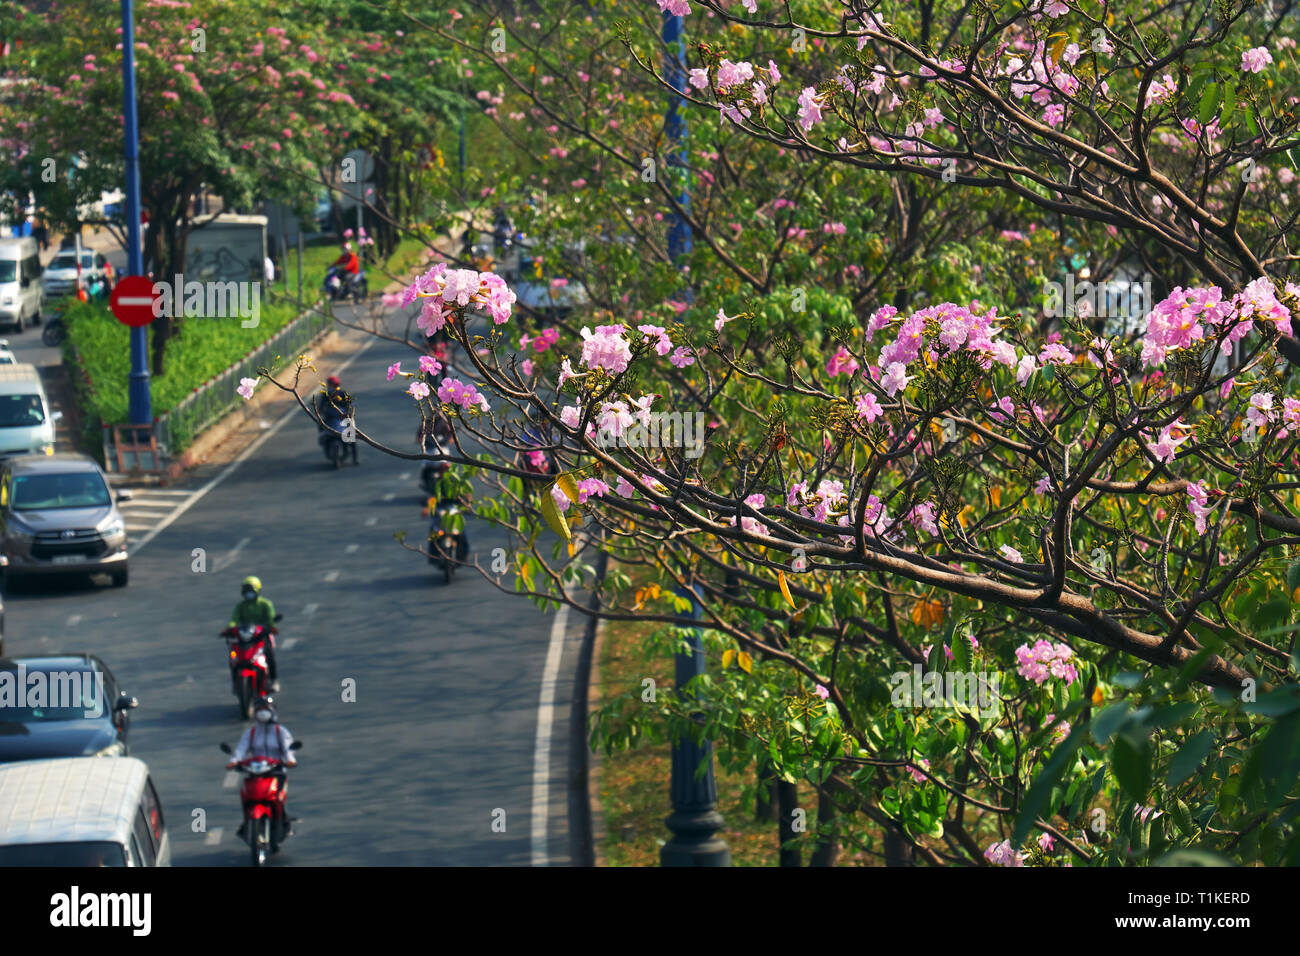 Beautiful landscape of Saigon from high view, street with vehicles as motorbikes, car move under tabebuia rosea flower tree, city beautiful in pink Stock Photo